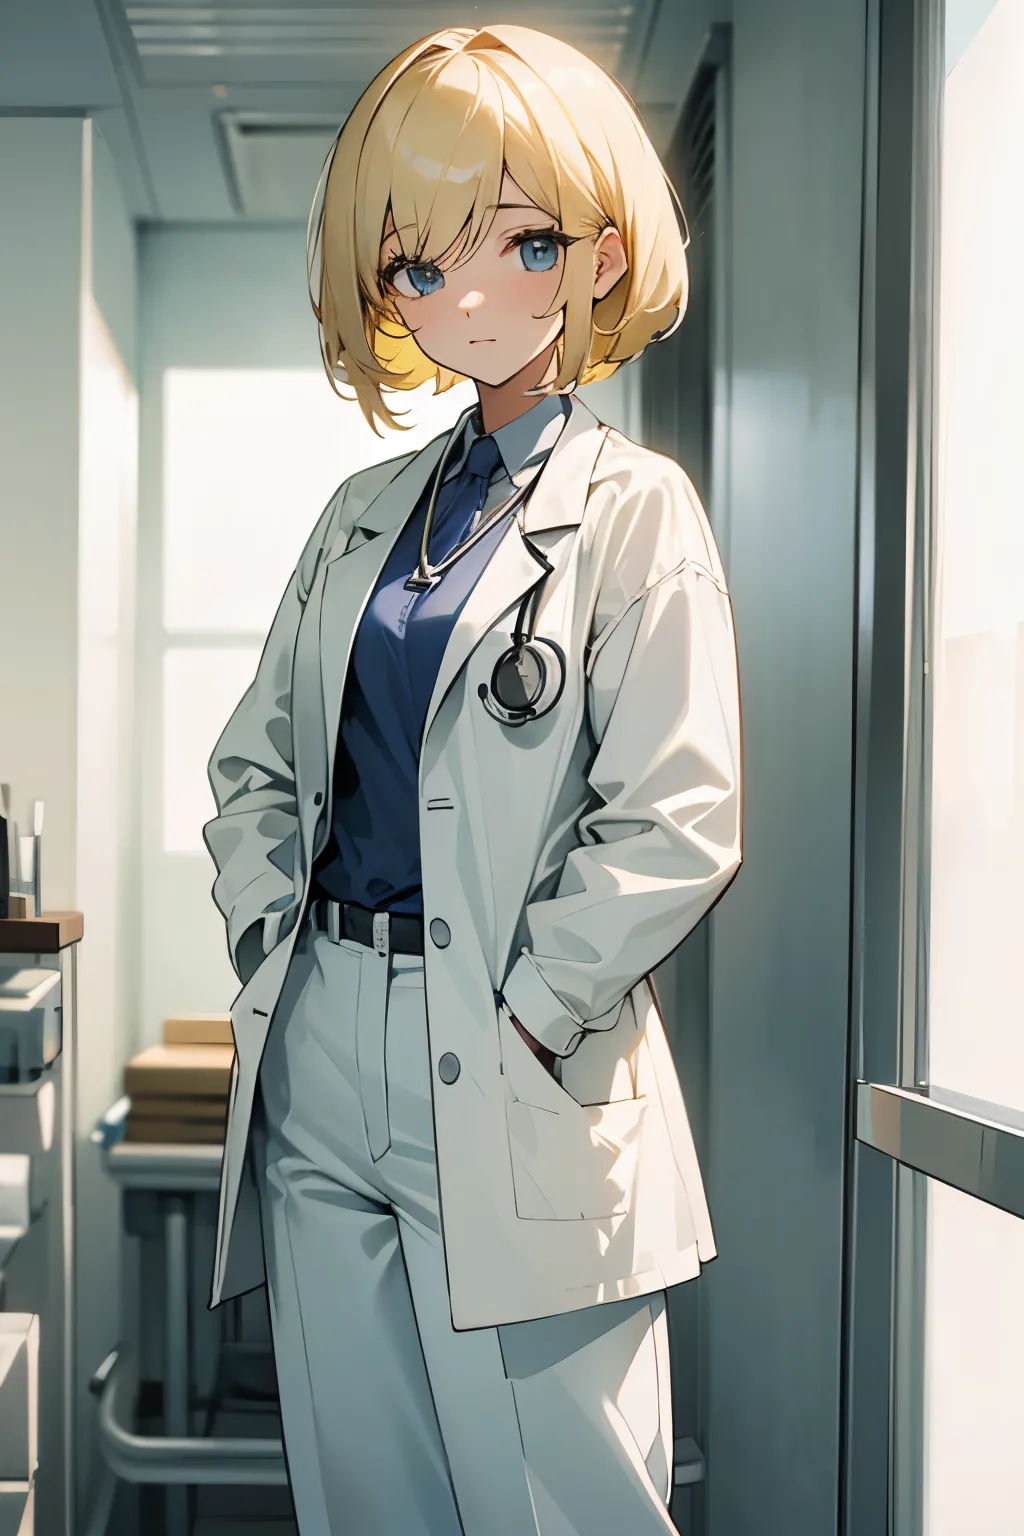 modern hospital, red hair woman, white doctor's lab coat, stethoscope sunny, looking at viewer, white pants